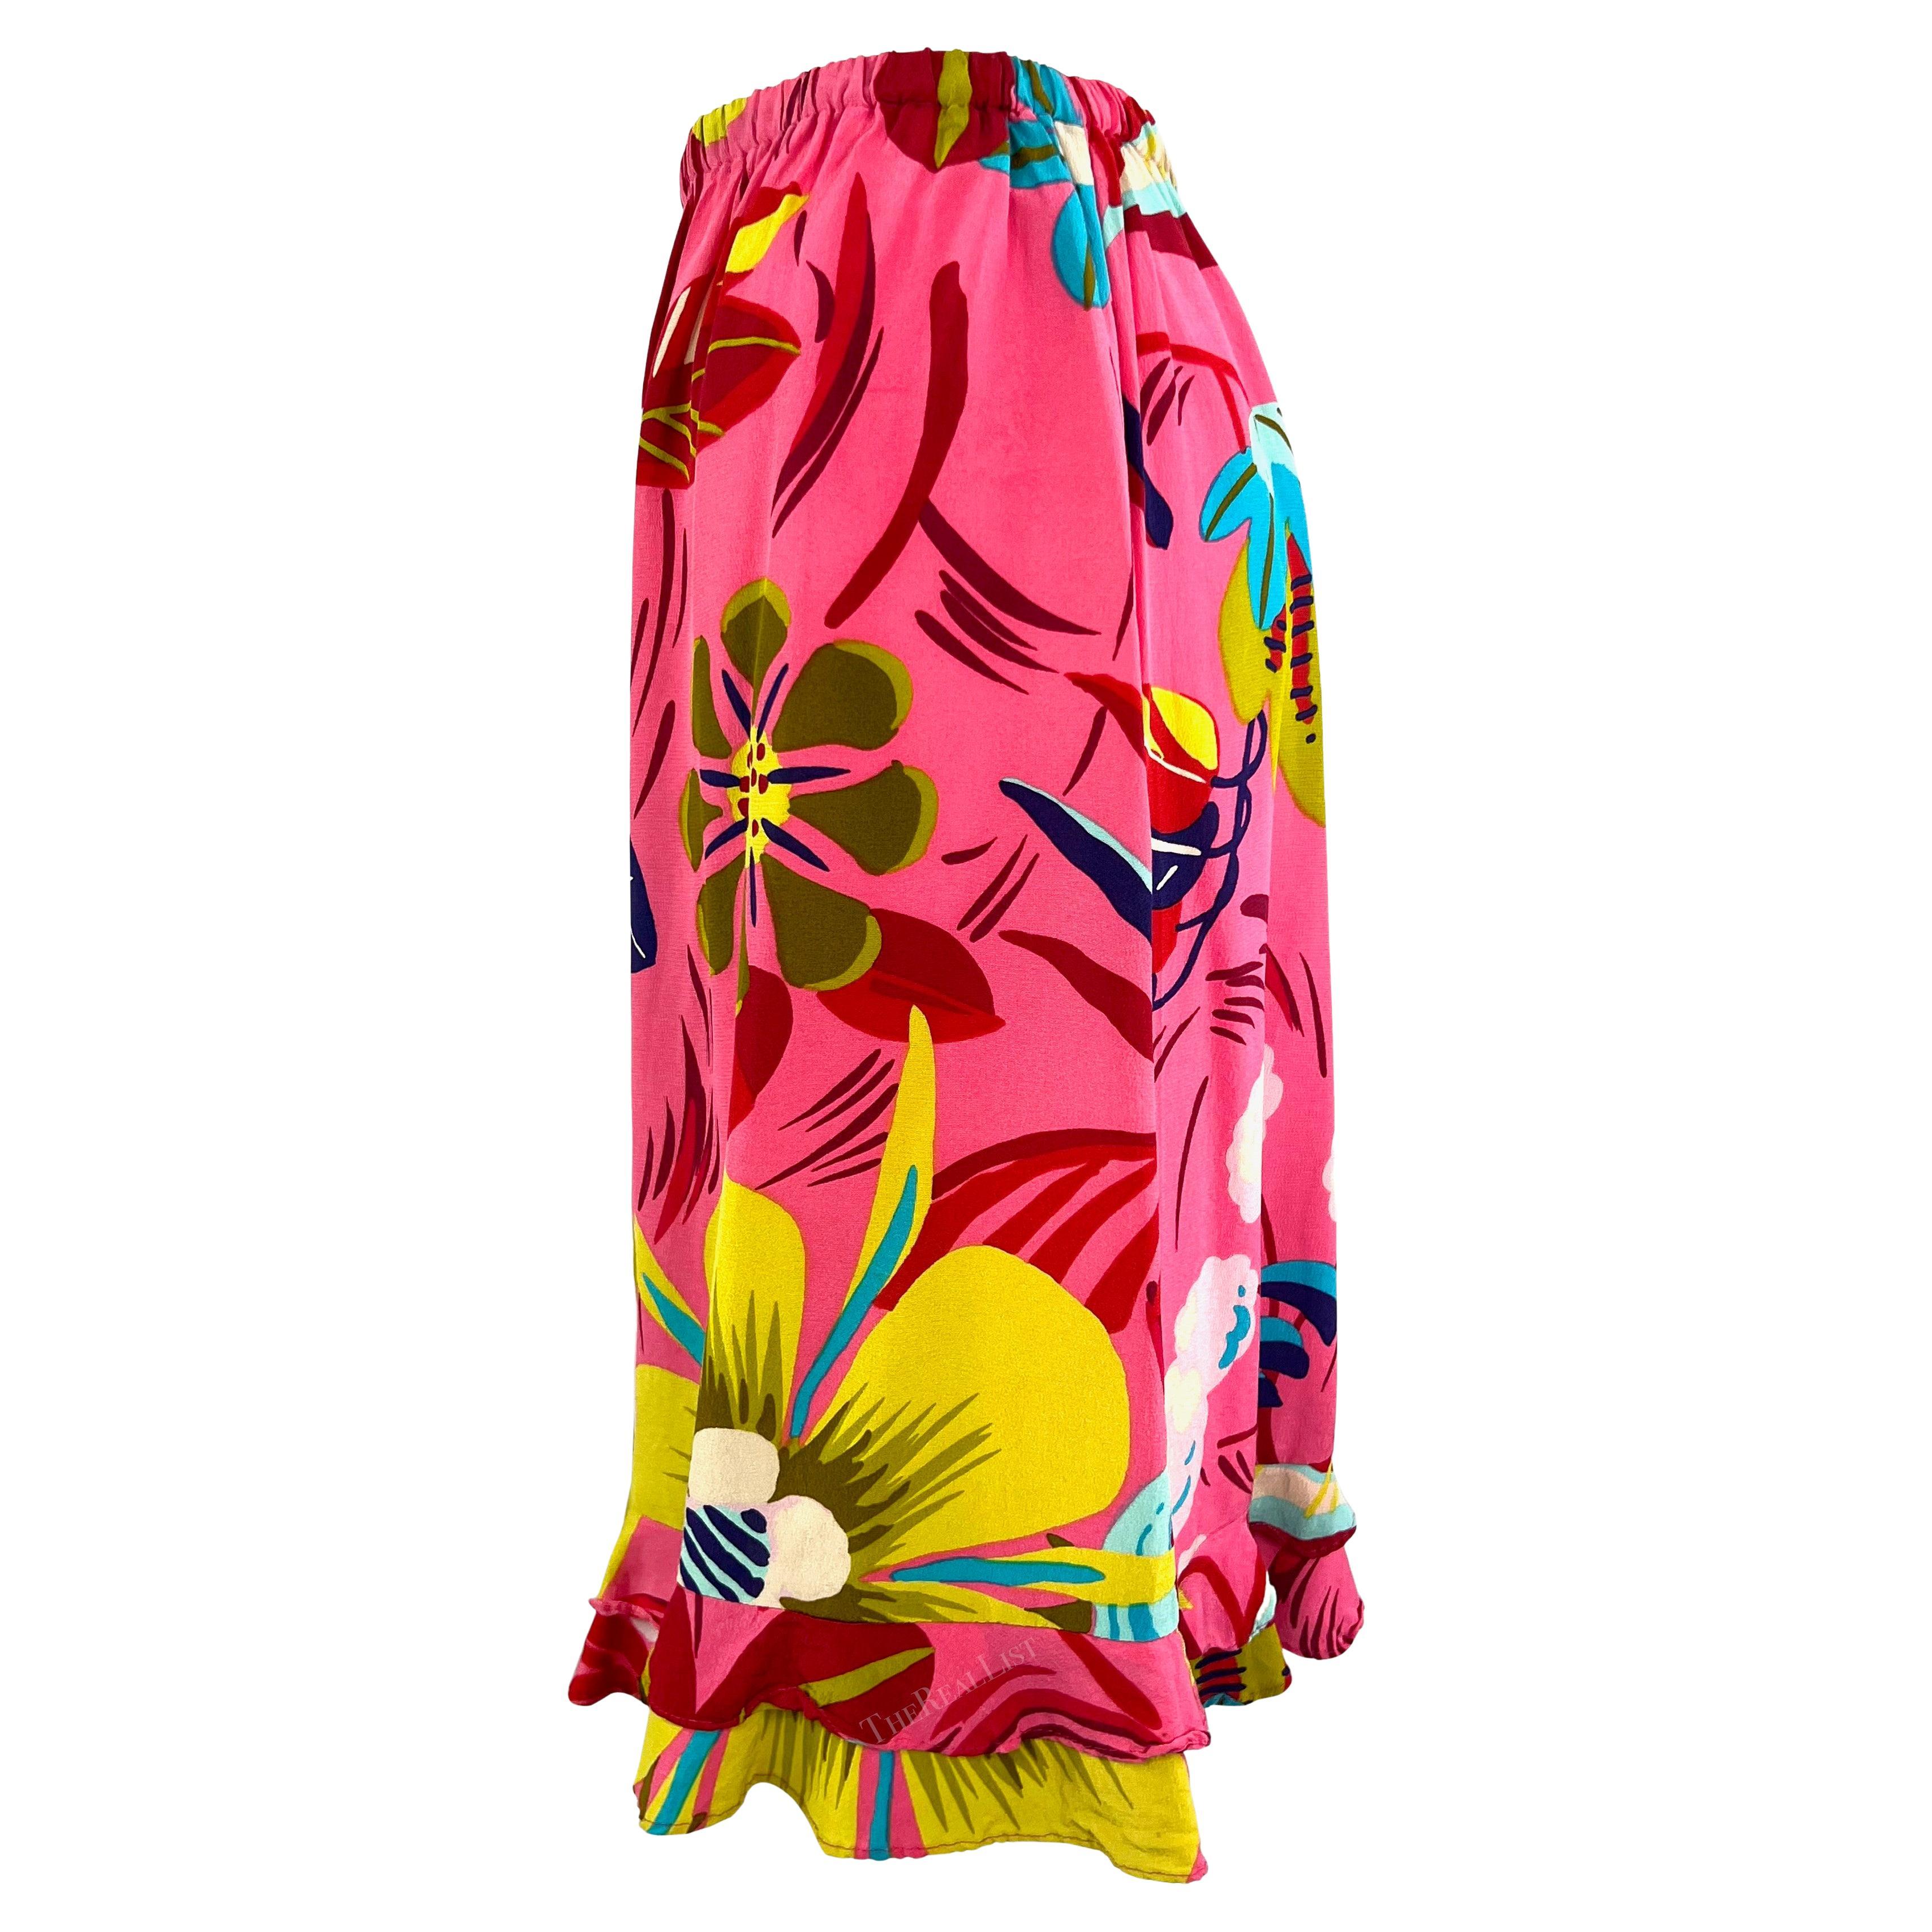 S/S 1999 Gucci by Tom Ford Vegas Hippy Runway Pink Silk Acid Floral Ruffle Skirt For Sale 1